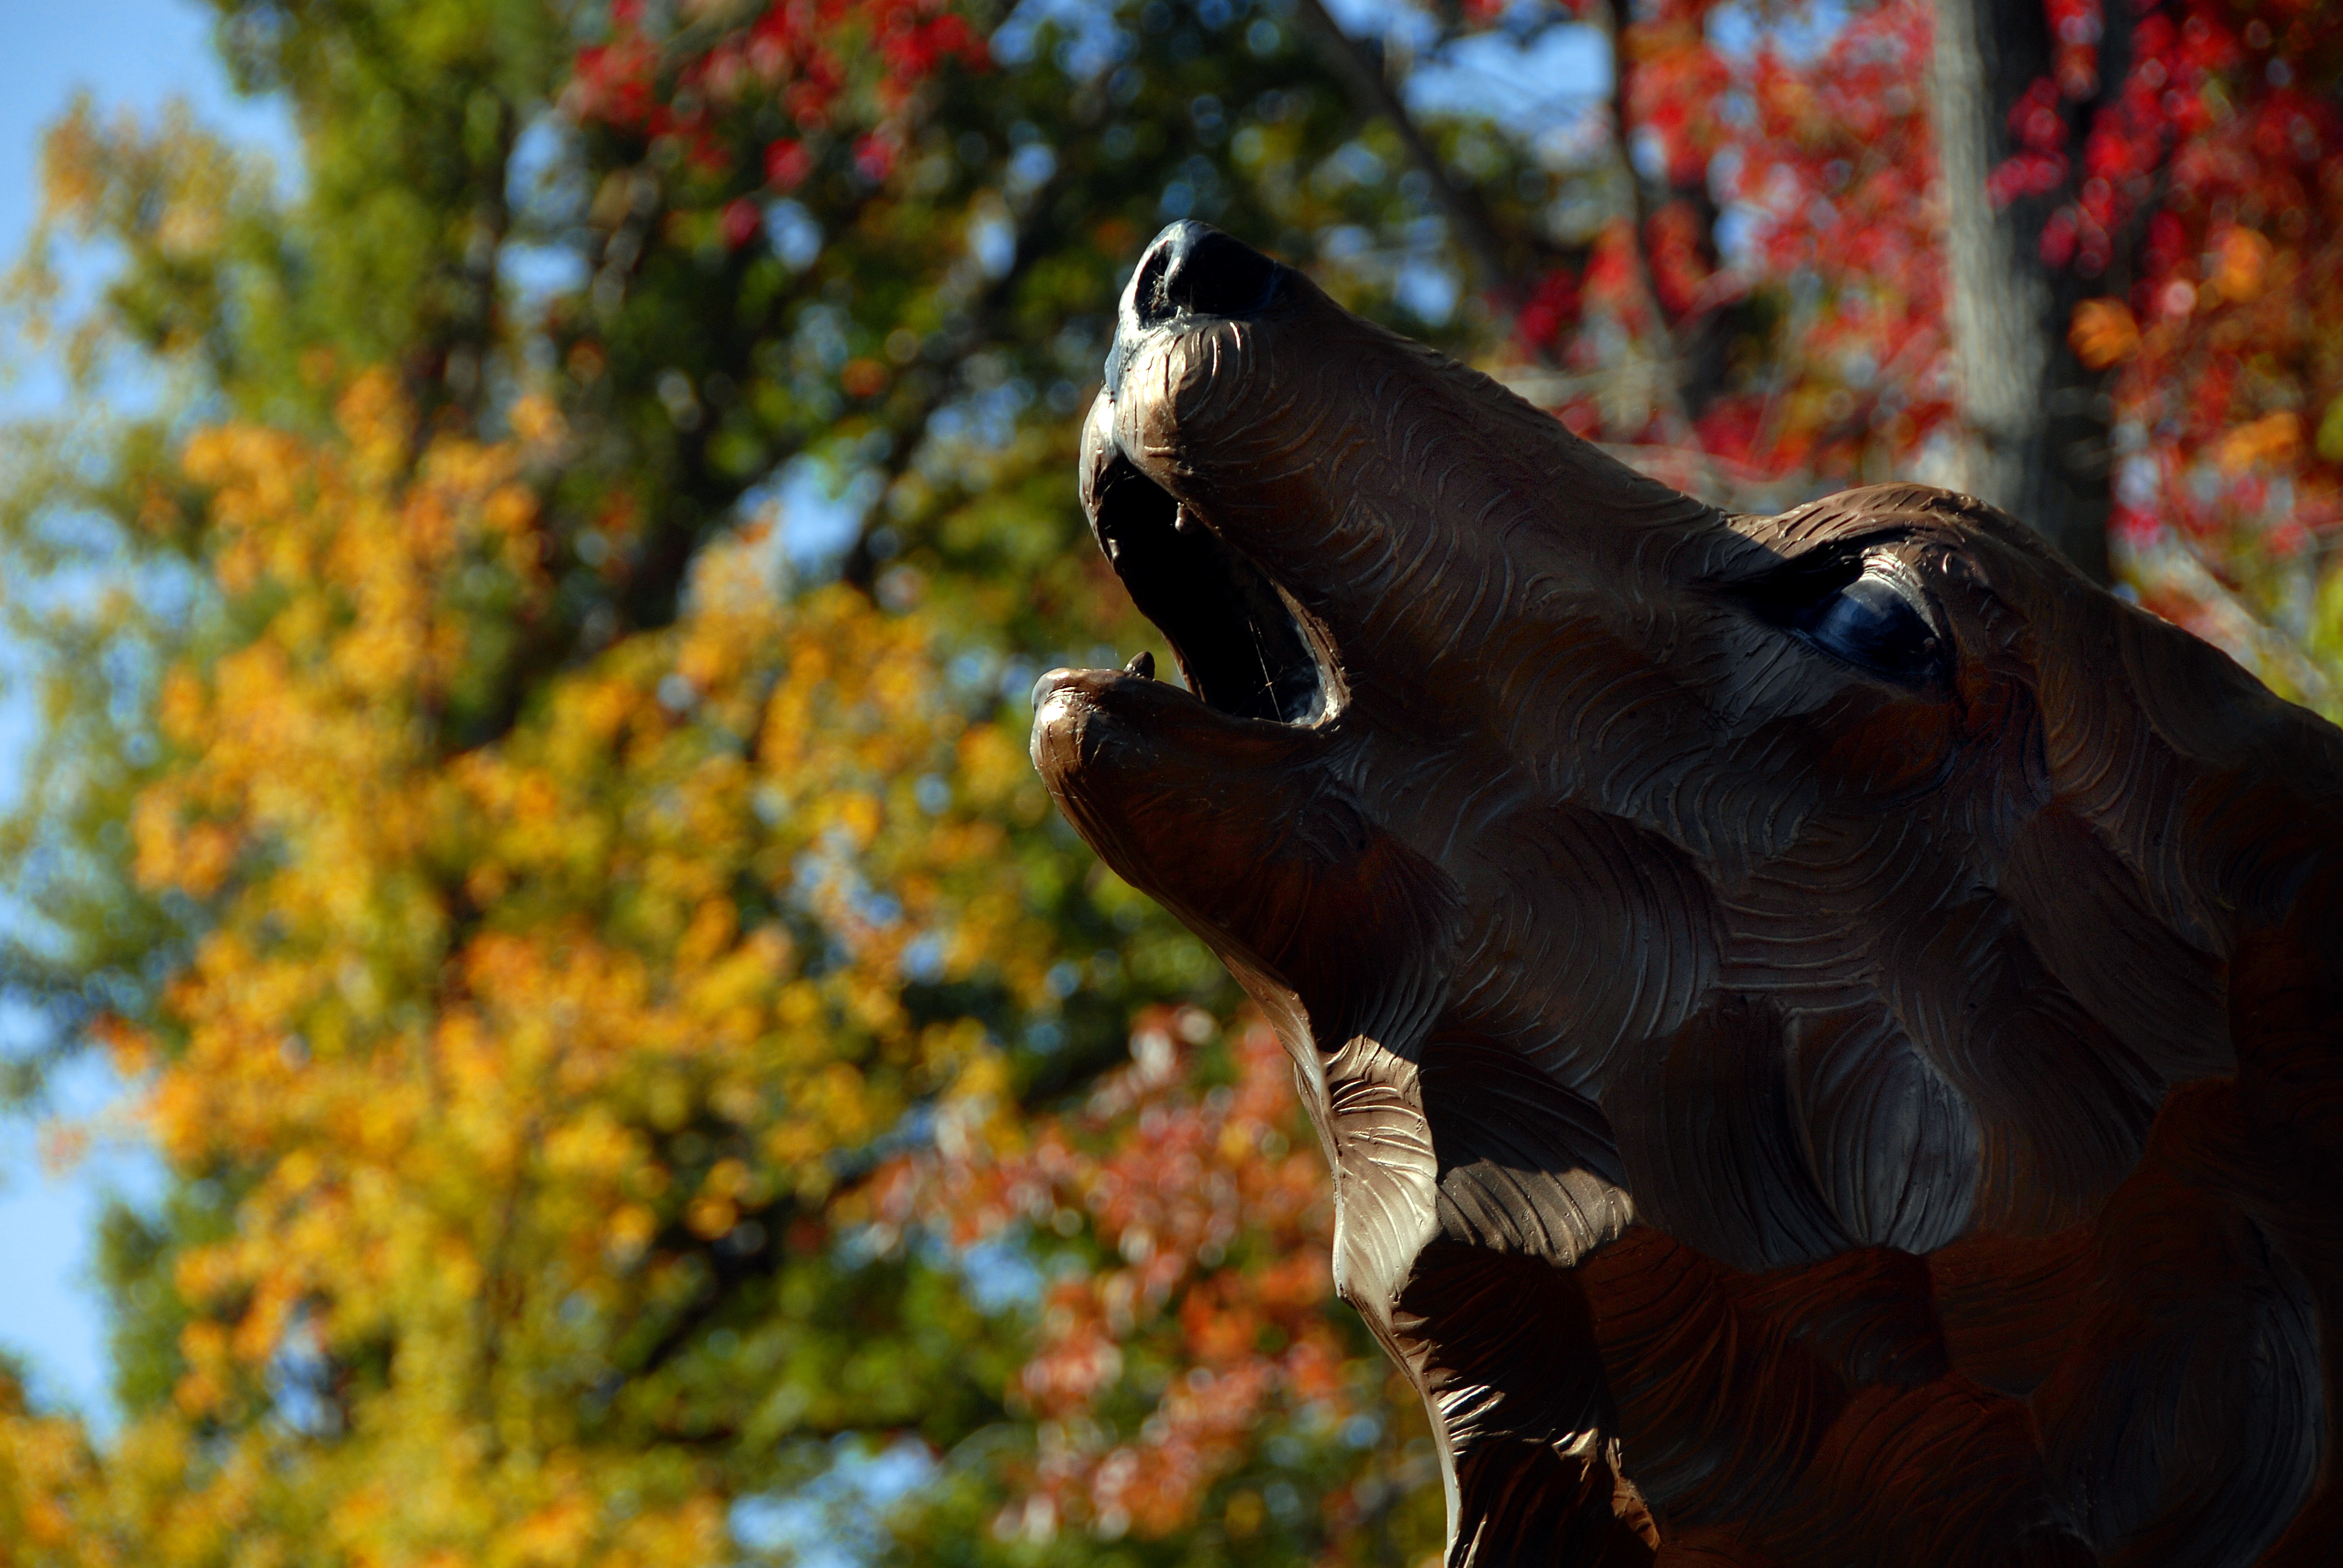 Howling wolf statue head backed by yellow, green, and red fall leaves